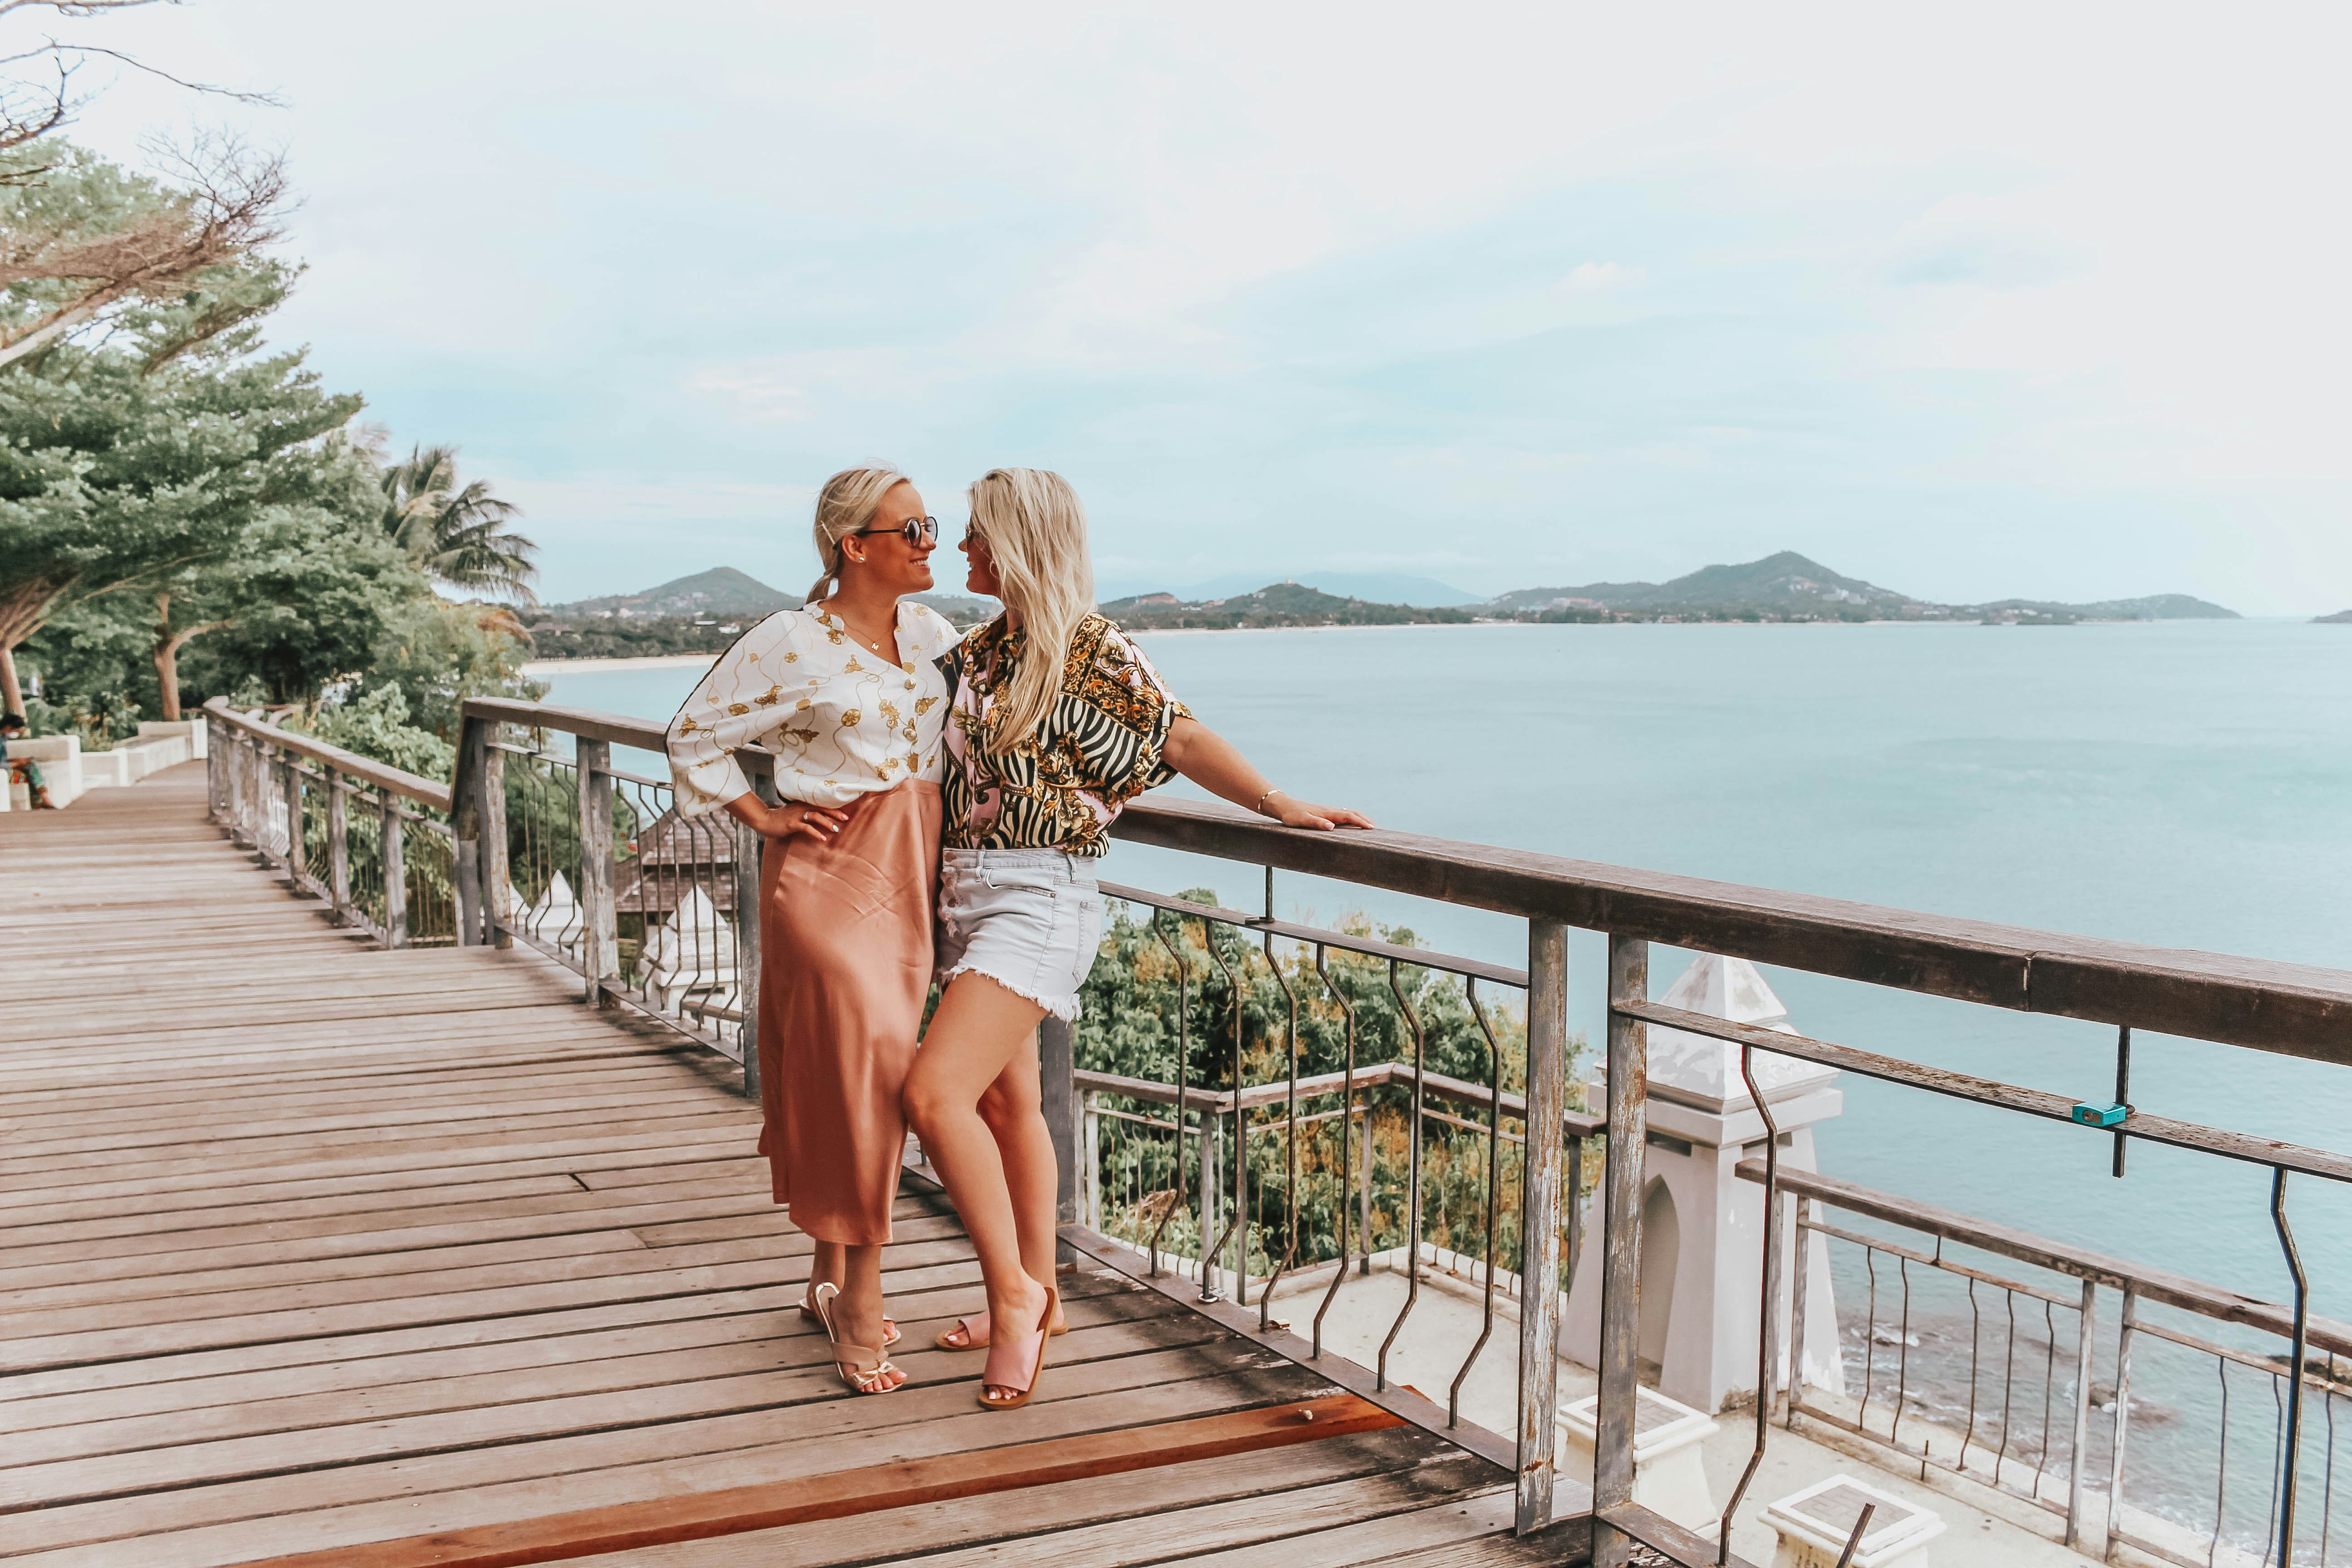 Whitney and Megan embracing on a tree-lined, tropical coastal boardwalk on Ko Samui, with the water and other islands visible behind.